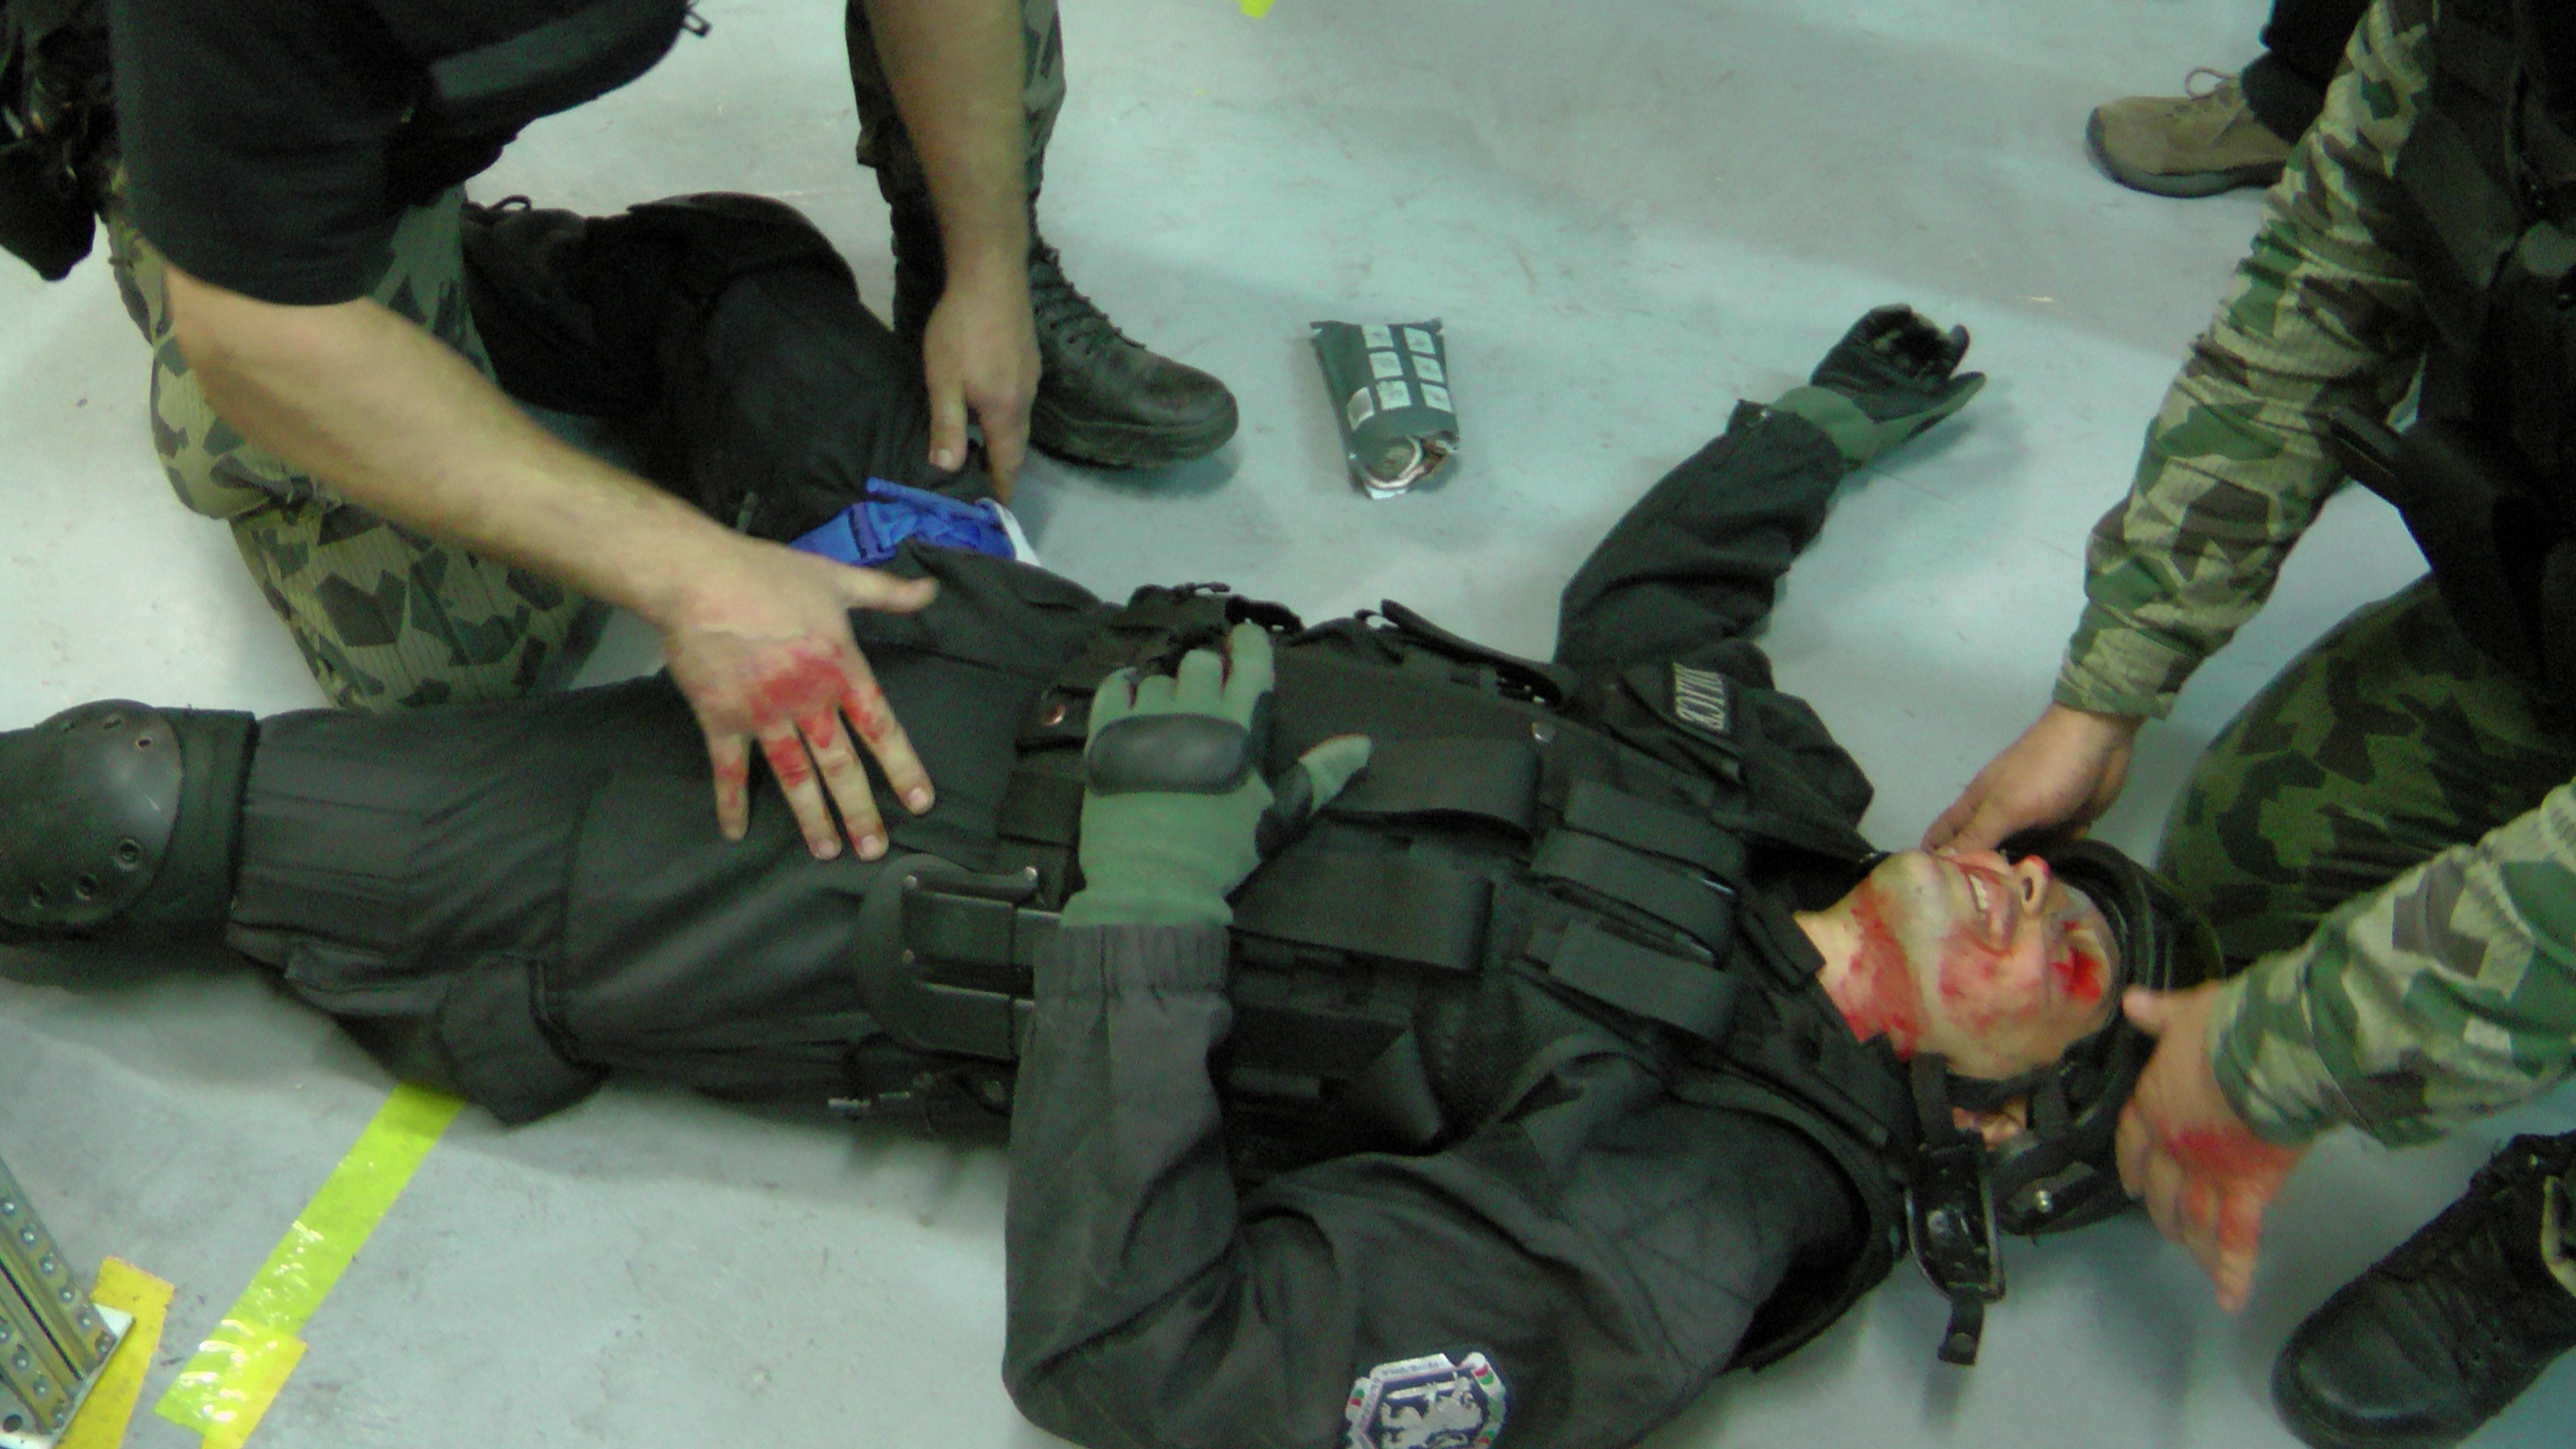 Jim's students of Bulgaria's national counterterrorist team applies a tourniquet to this downed Special Operations officer during a realistic scenario.